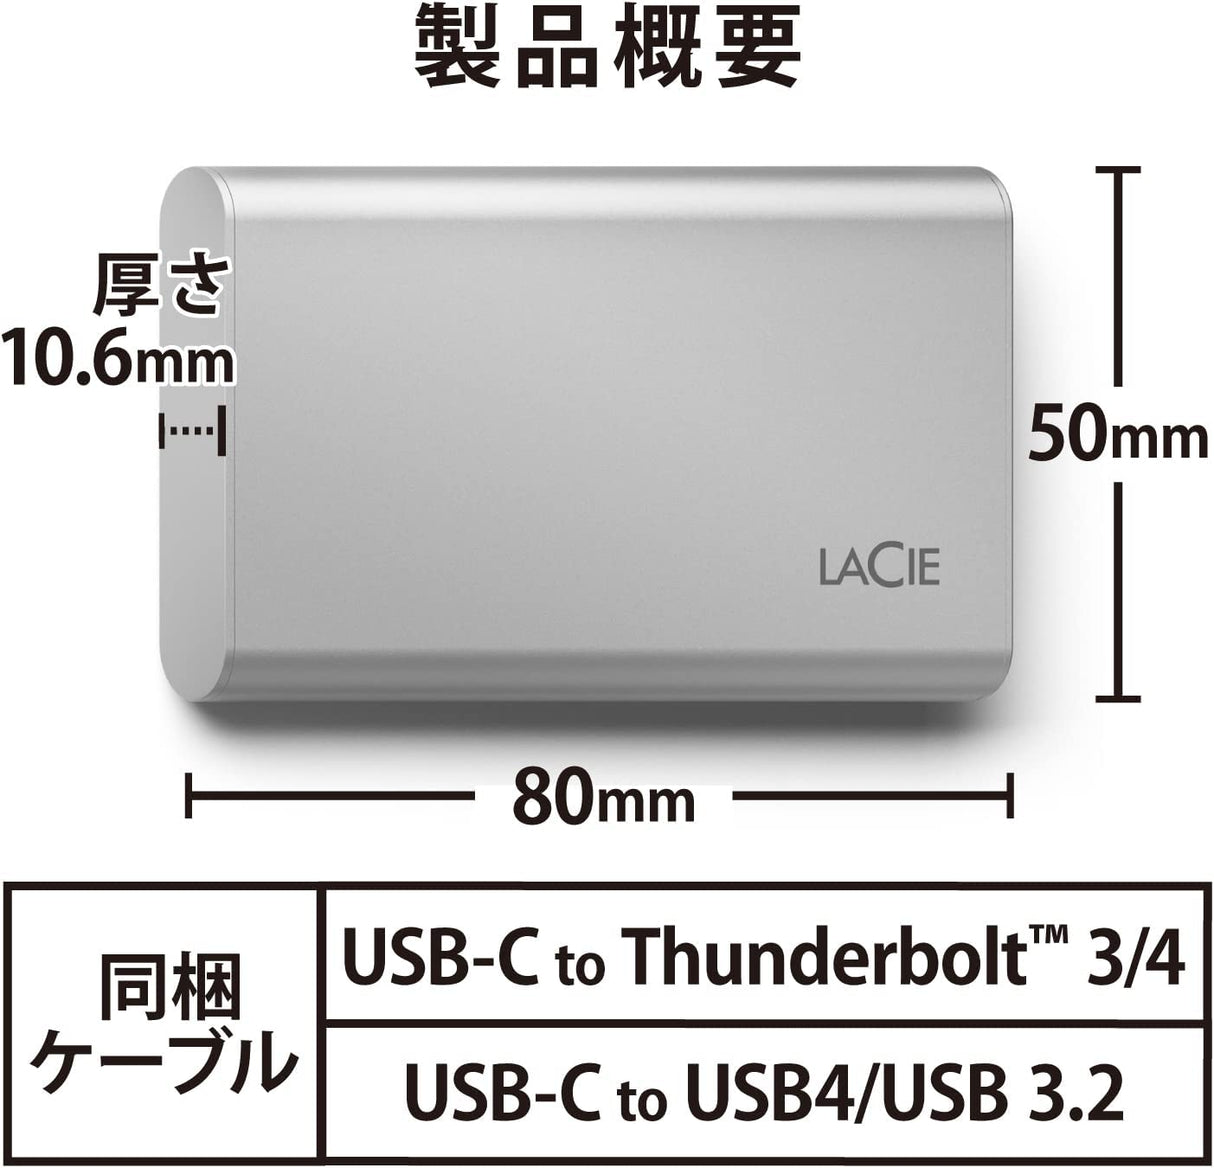 LaCie Portable SSD 2TB External Solid State Drive - USB-C, USB 3.2 Gen 2, speeds up to 1050MB/s, Moon Silver, for Mac PC and iPad, with Rescue Services (STKS2000400) 2TB New Model